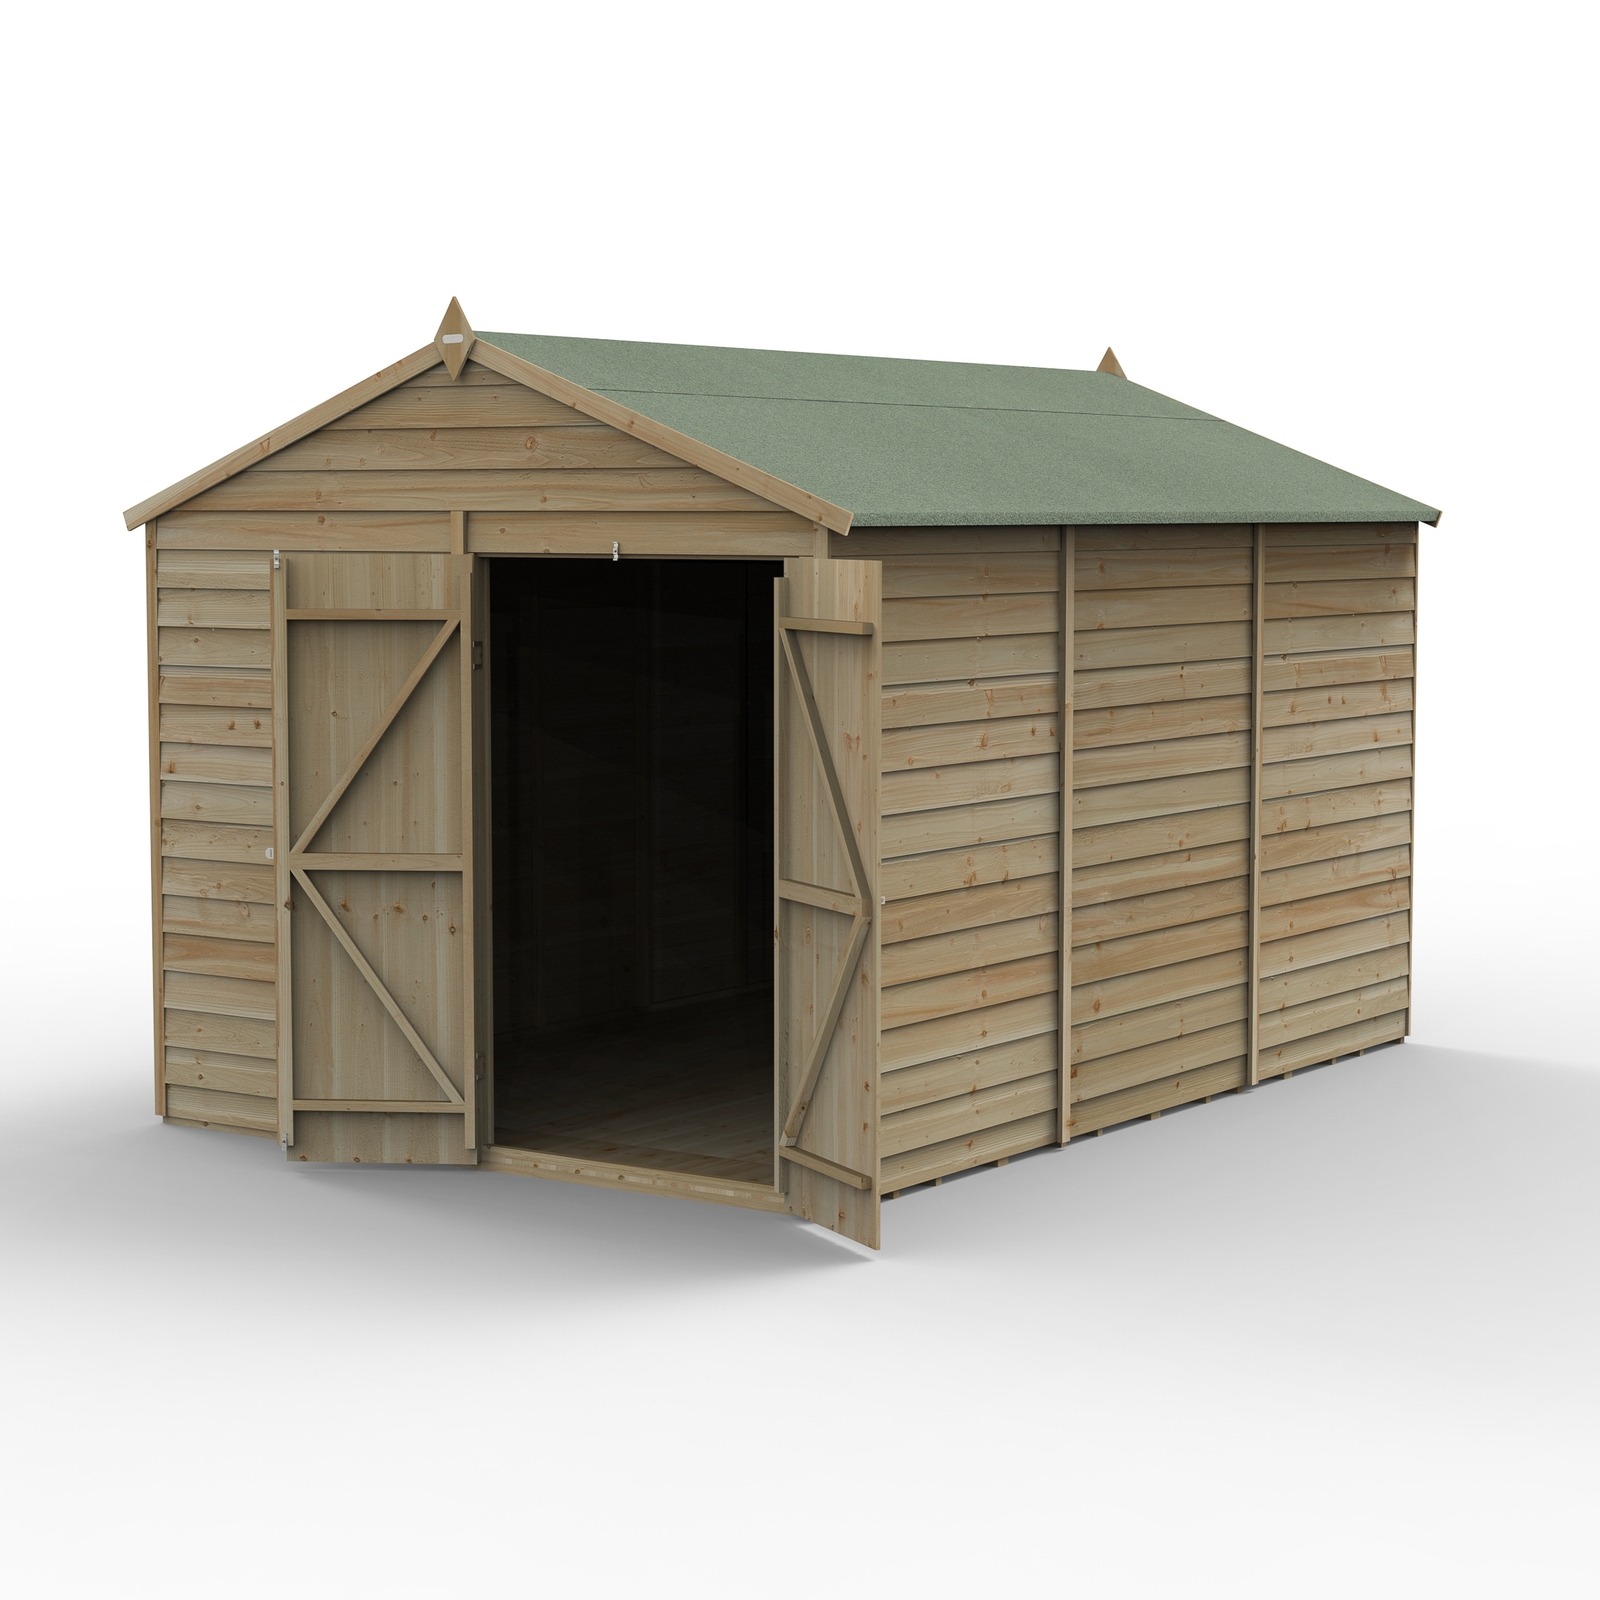 Forest Garden 4LIFE Apex Shed 8 x 12ft - Double Door No Window (Home Delivery)